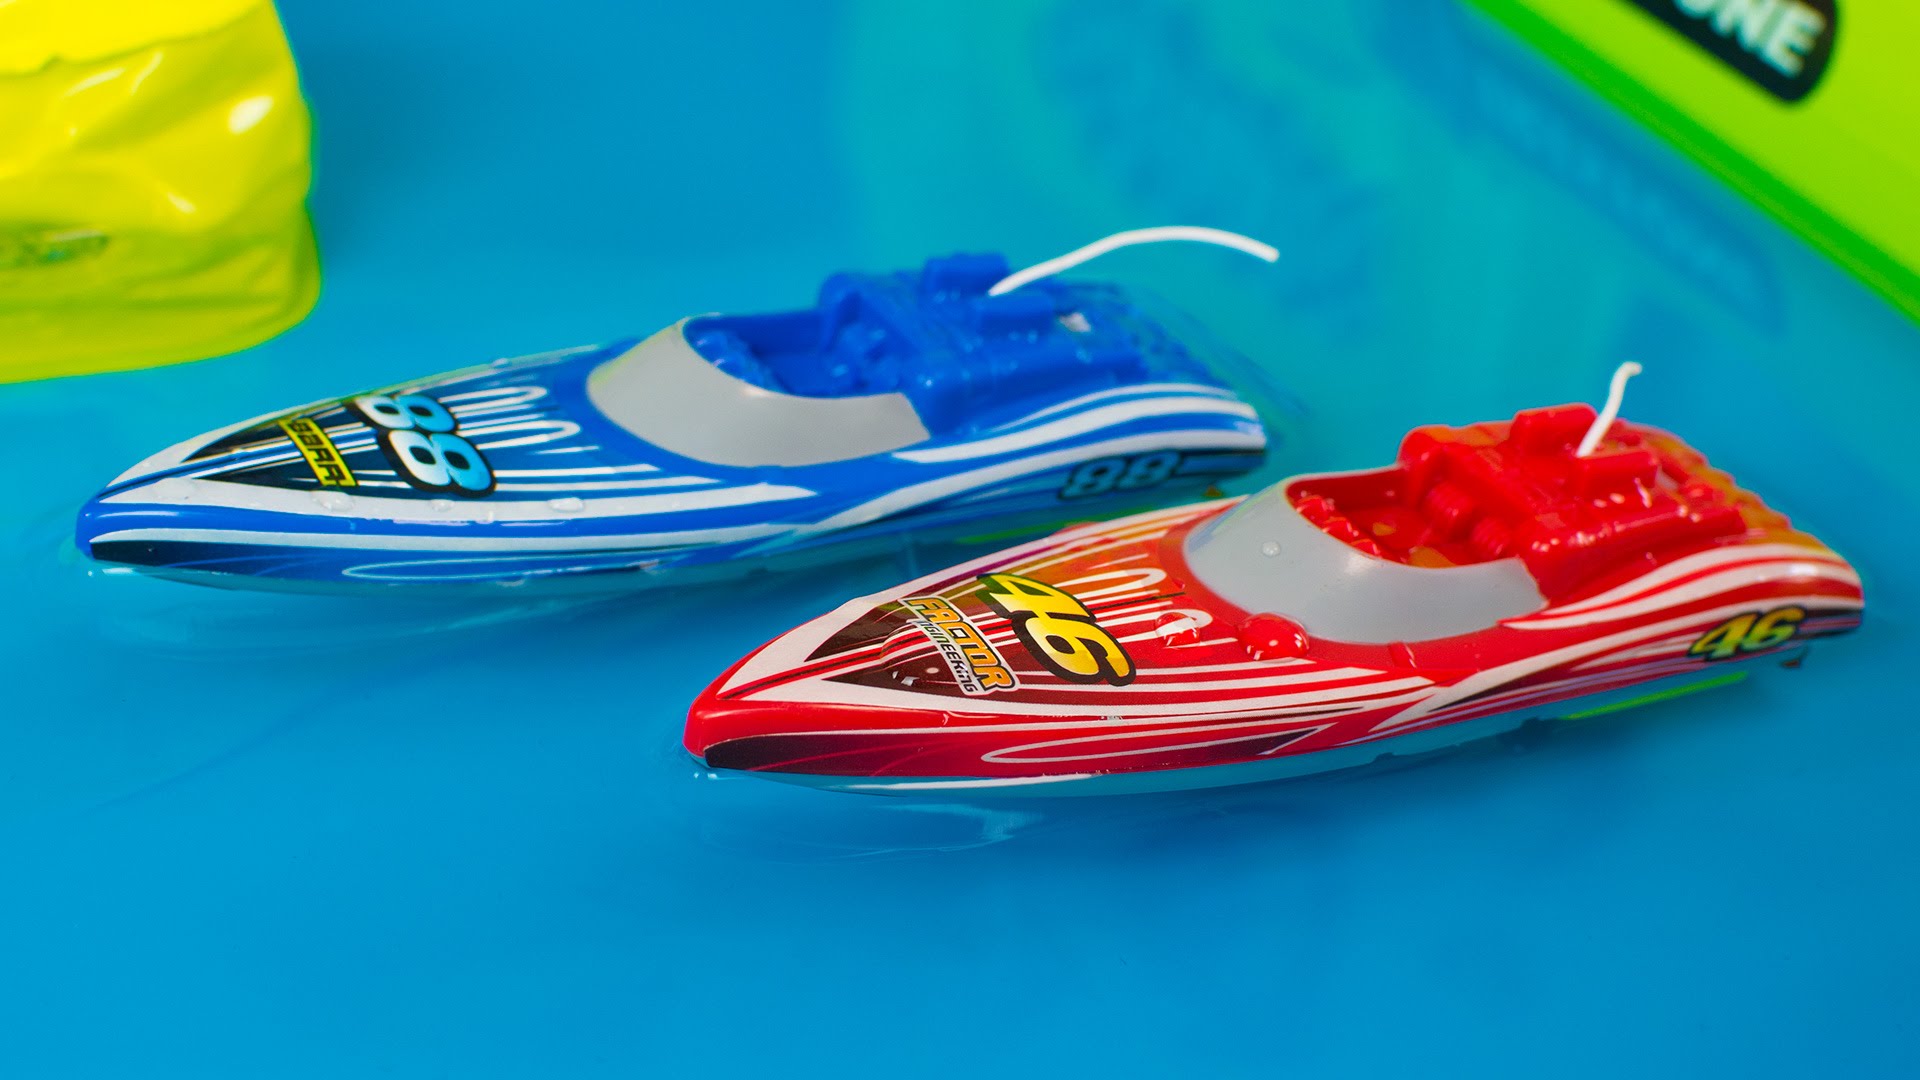 Toy Boats for Kids Sharper Image RC Speed Boat Racing Playset Toys ...